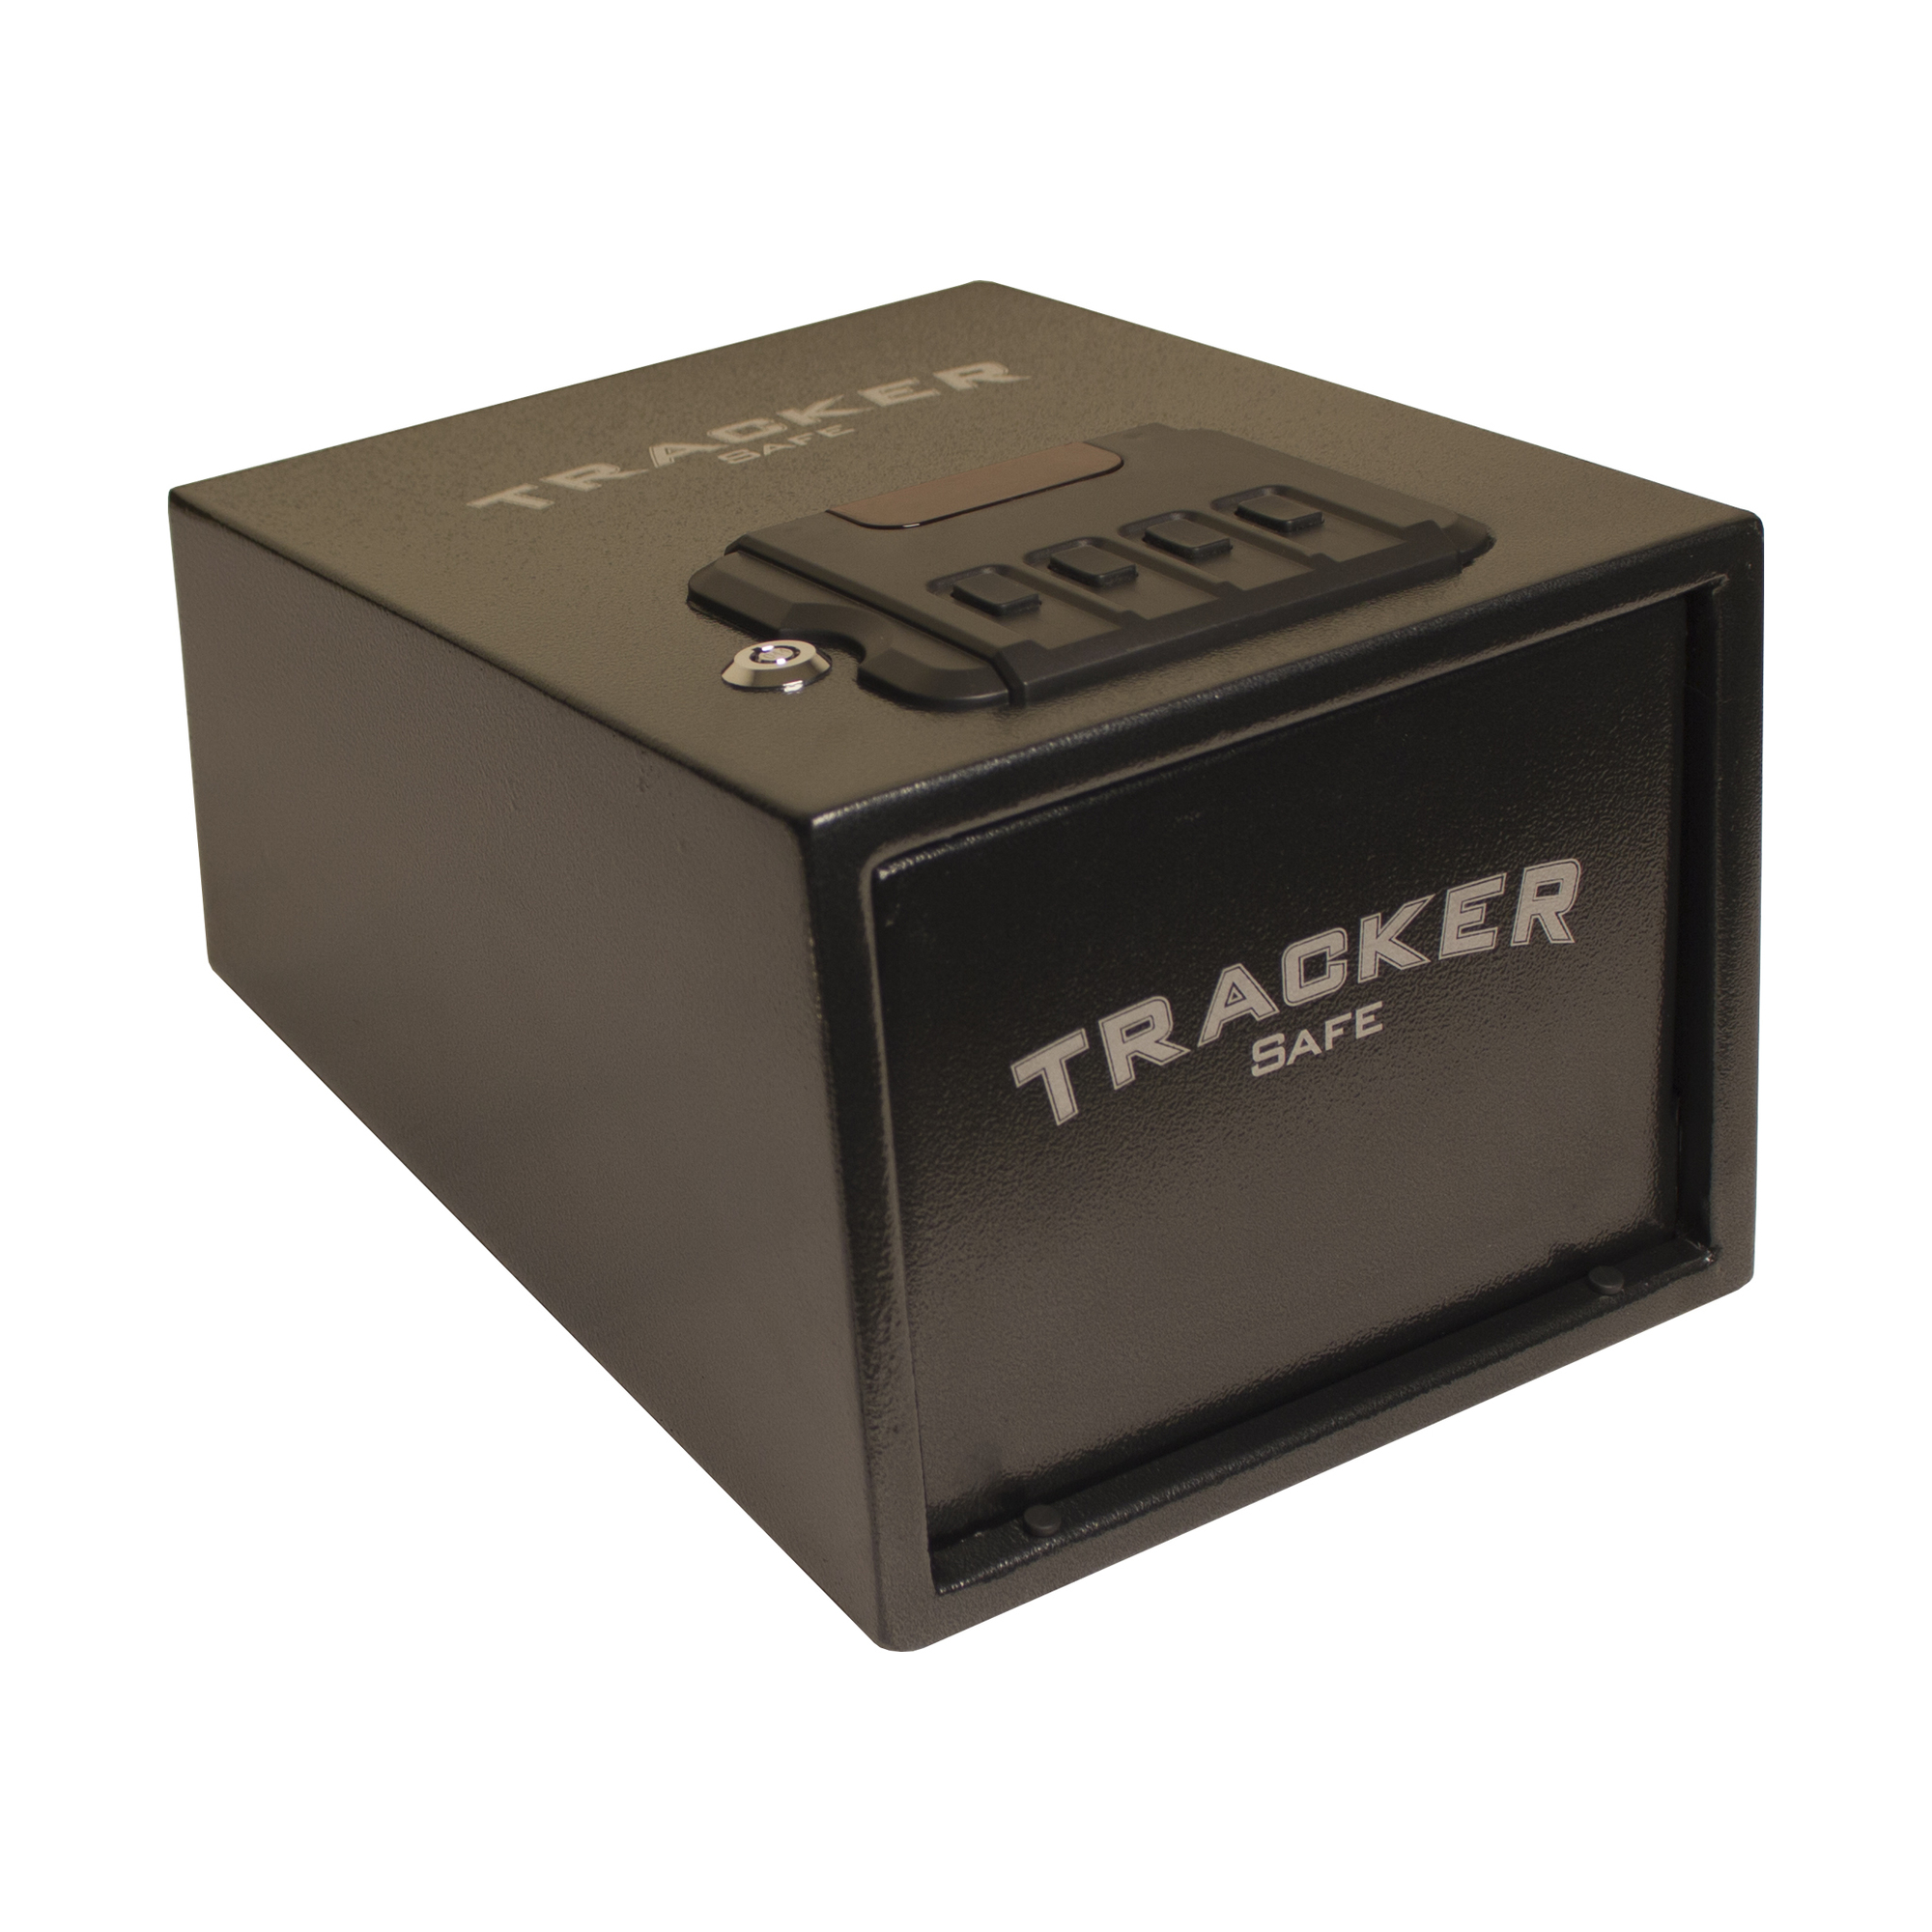 Tracker Safe, 0.24 cu. ft. Quick Access Safe Electronic Lock, Lock Type Electronic, Model QAPS